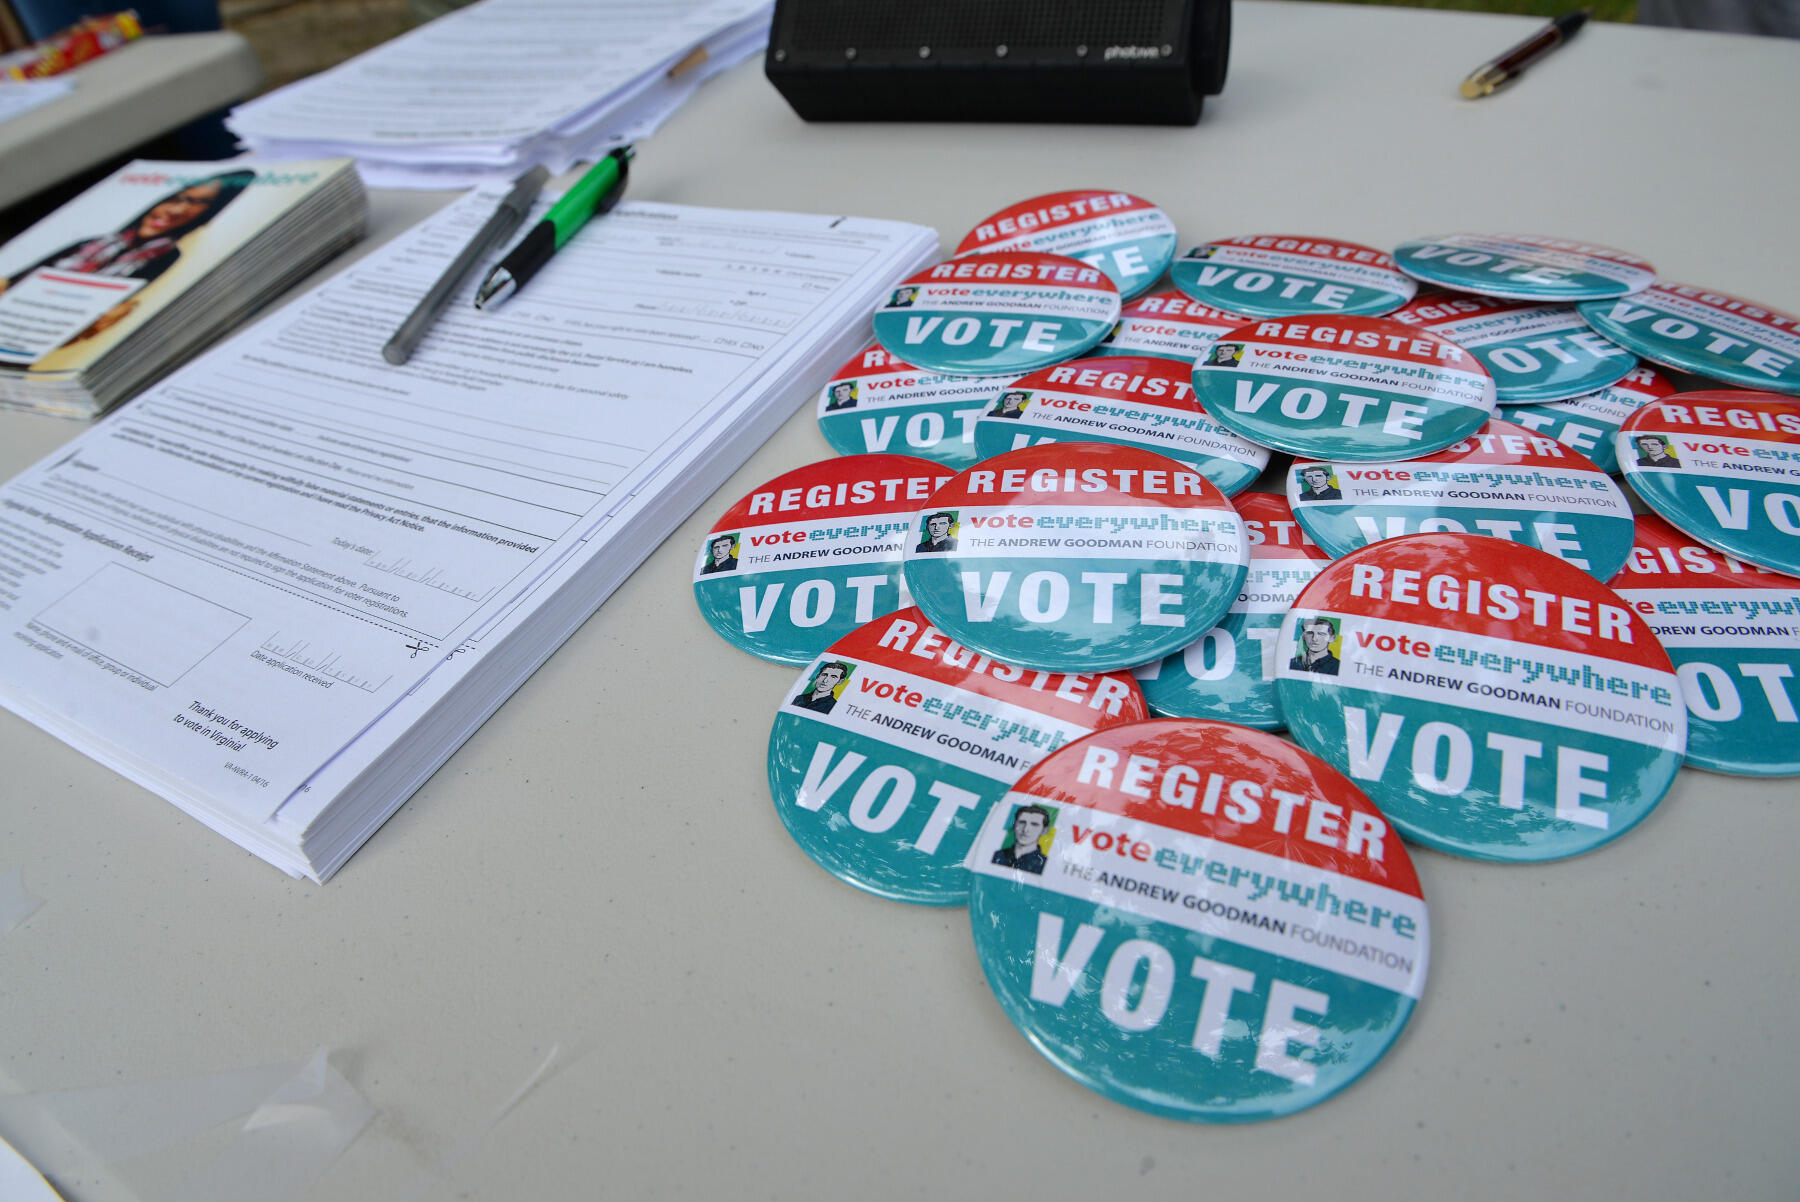 On Saturday at Mosby Court, VCU students registered residents to vote in the upcoming presidential election.